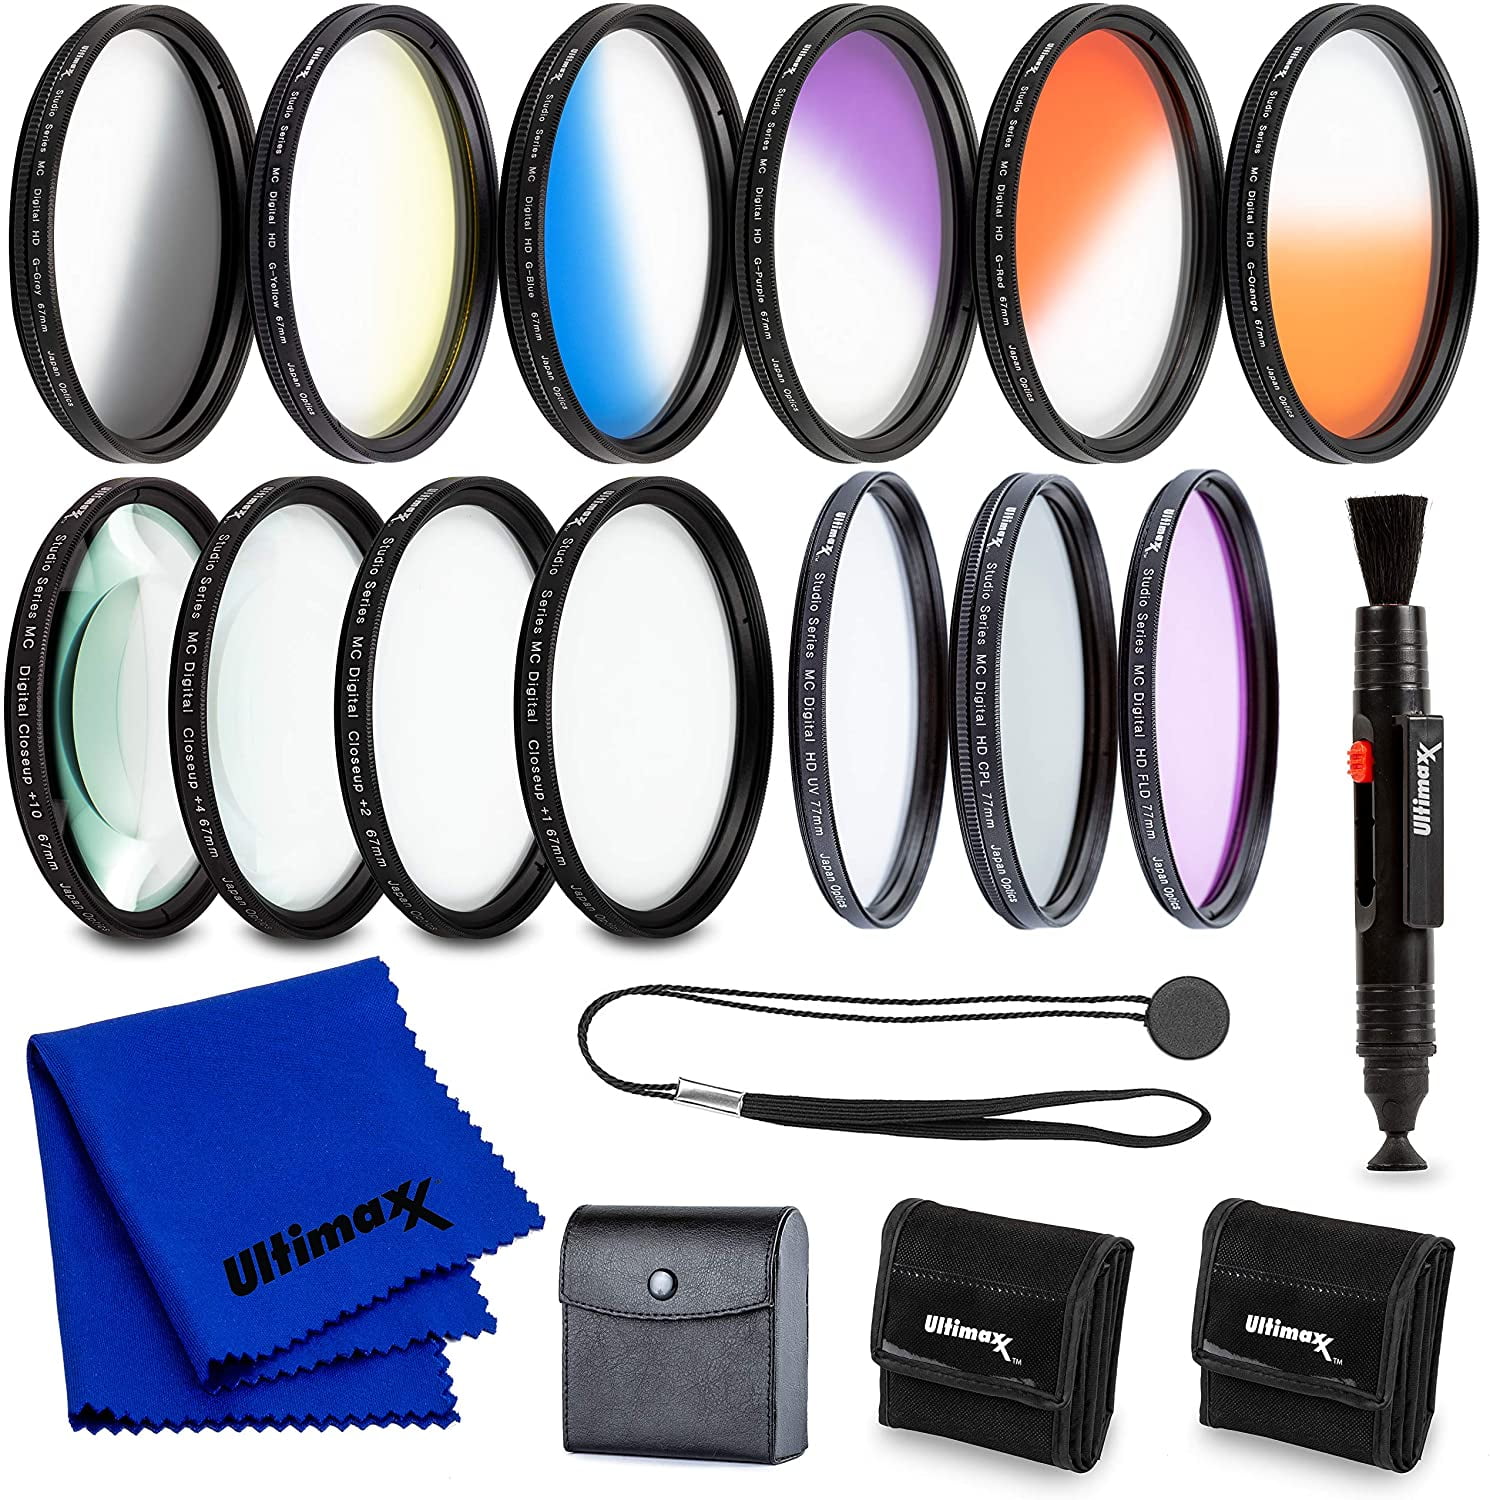 72mm PREMIUM Filter Kit Bundle +1 +2 +4 +10 Close-Up Macro Filter Set Deluxe Filter Carry Case A390 Includes Multi-Coated 3 PC Filter Kit UltraPro Deluxe Lens Cleaning Kit Lens Cap Keeper Lens Cleaning Pen UV, CPL, FLD For Sony Alpha DSLR-A290